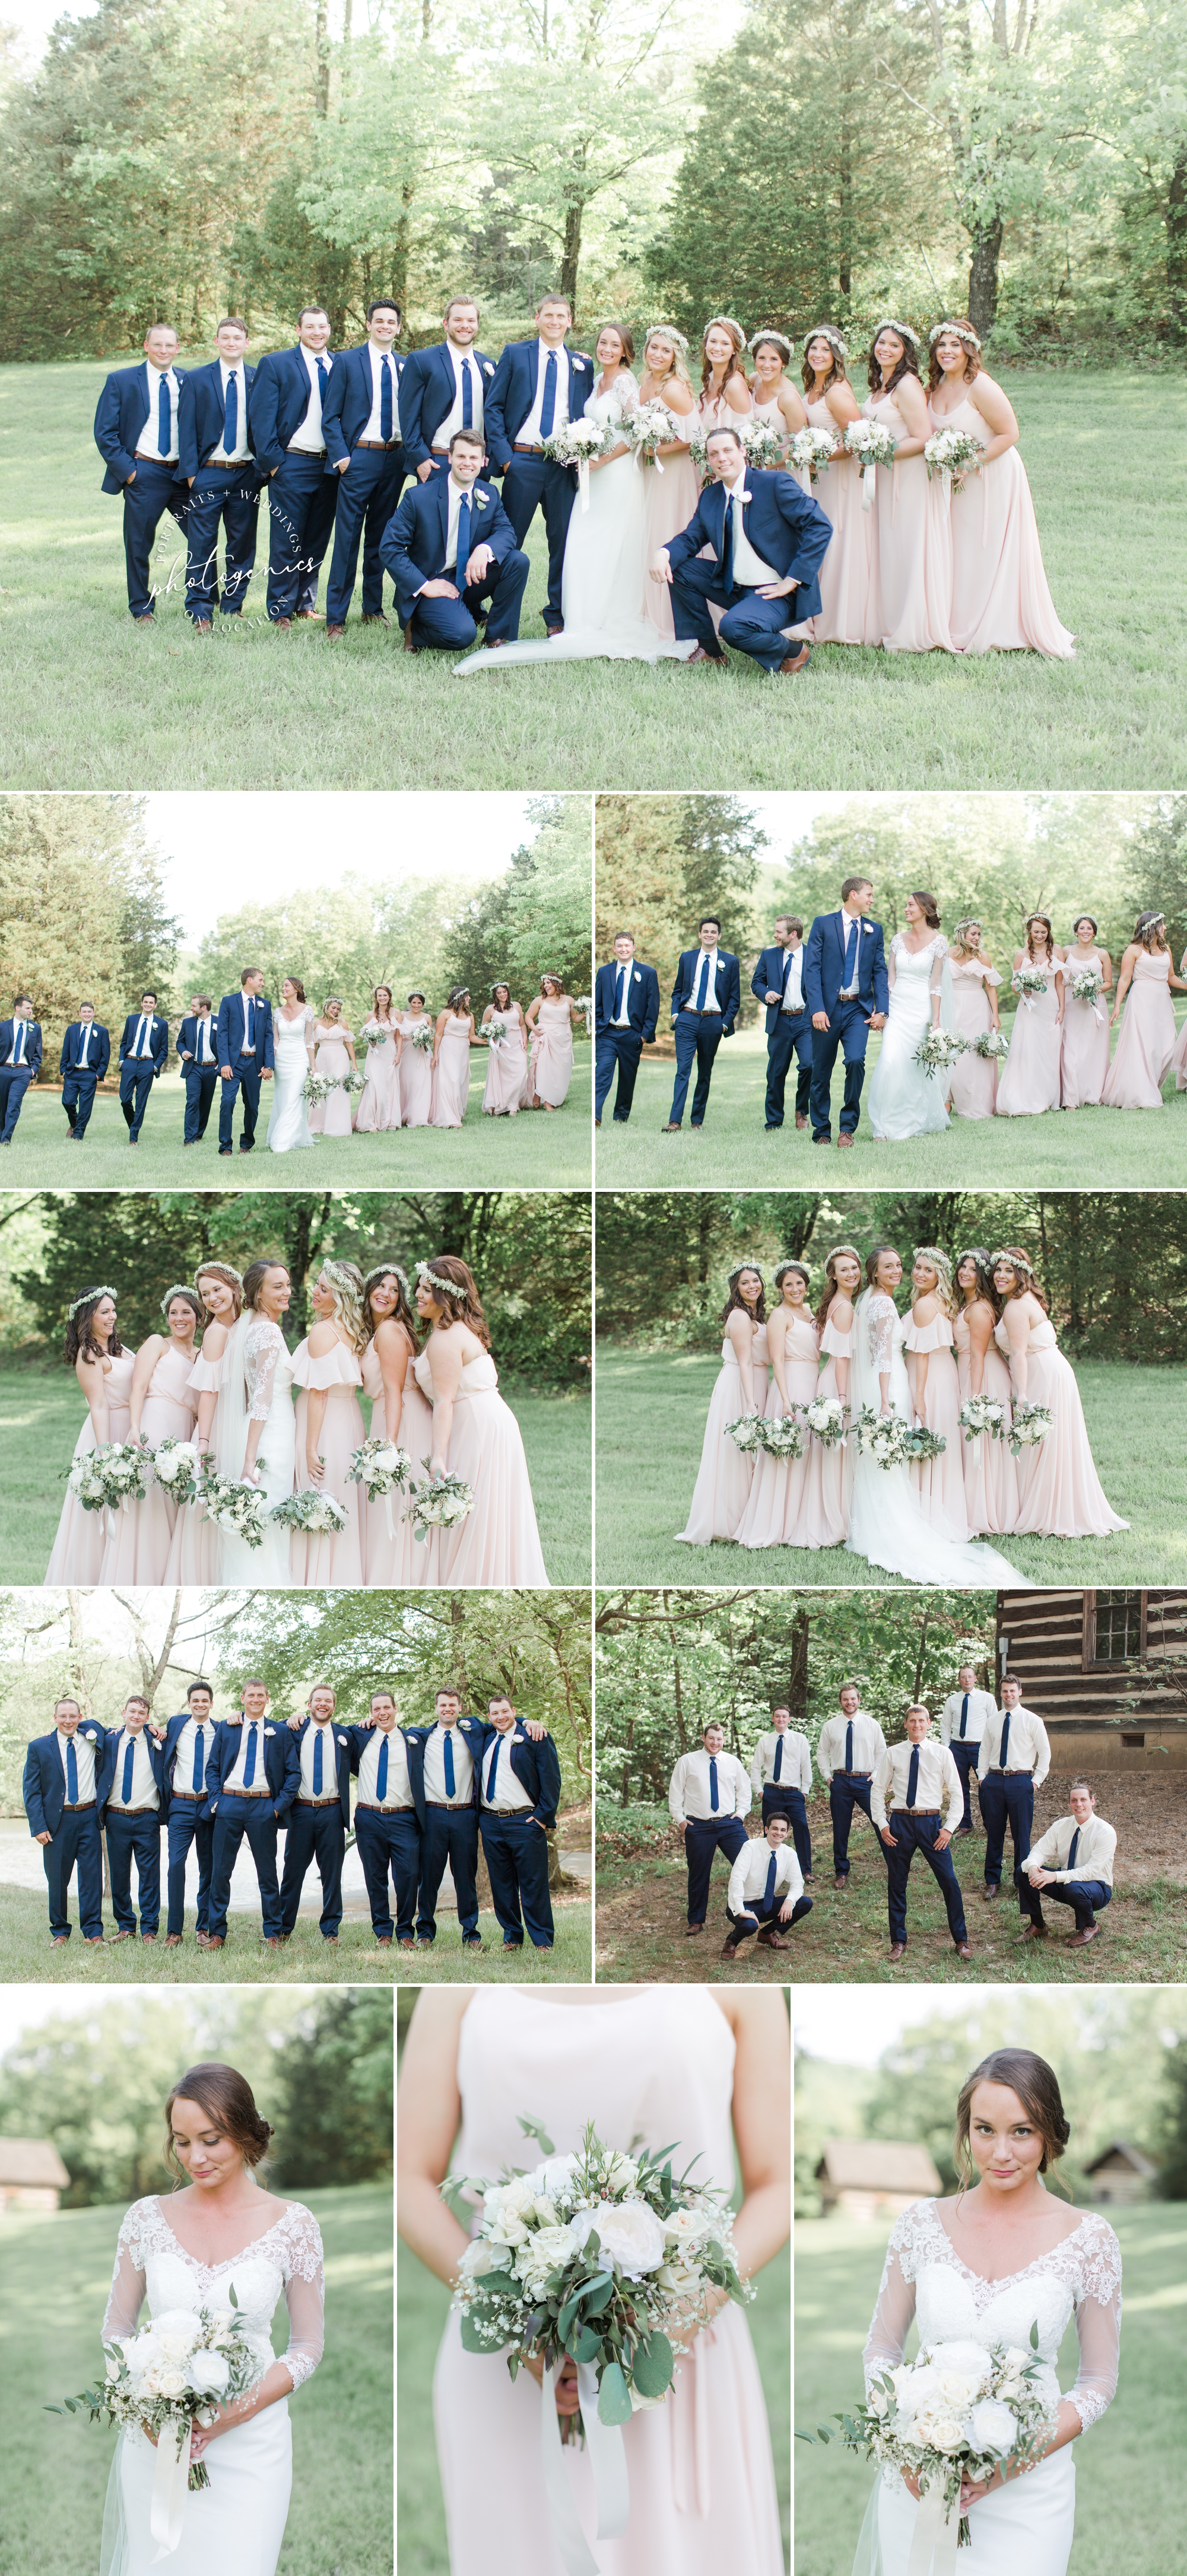 wedding_washington_mo_missouri_photographer_best_of_weddings_photography_wed_country_chic_floral_crowns_navy_blush_farm